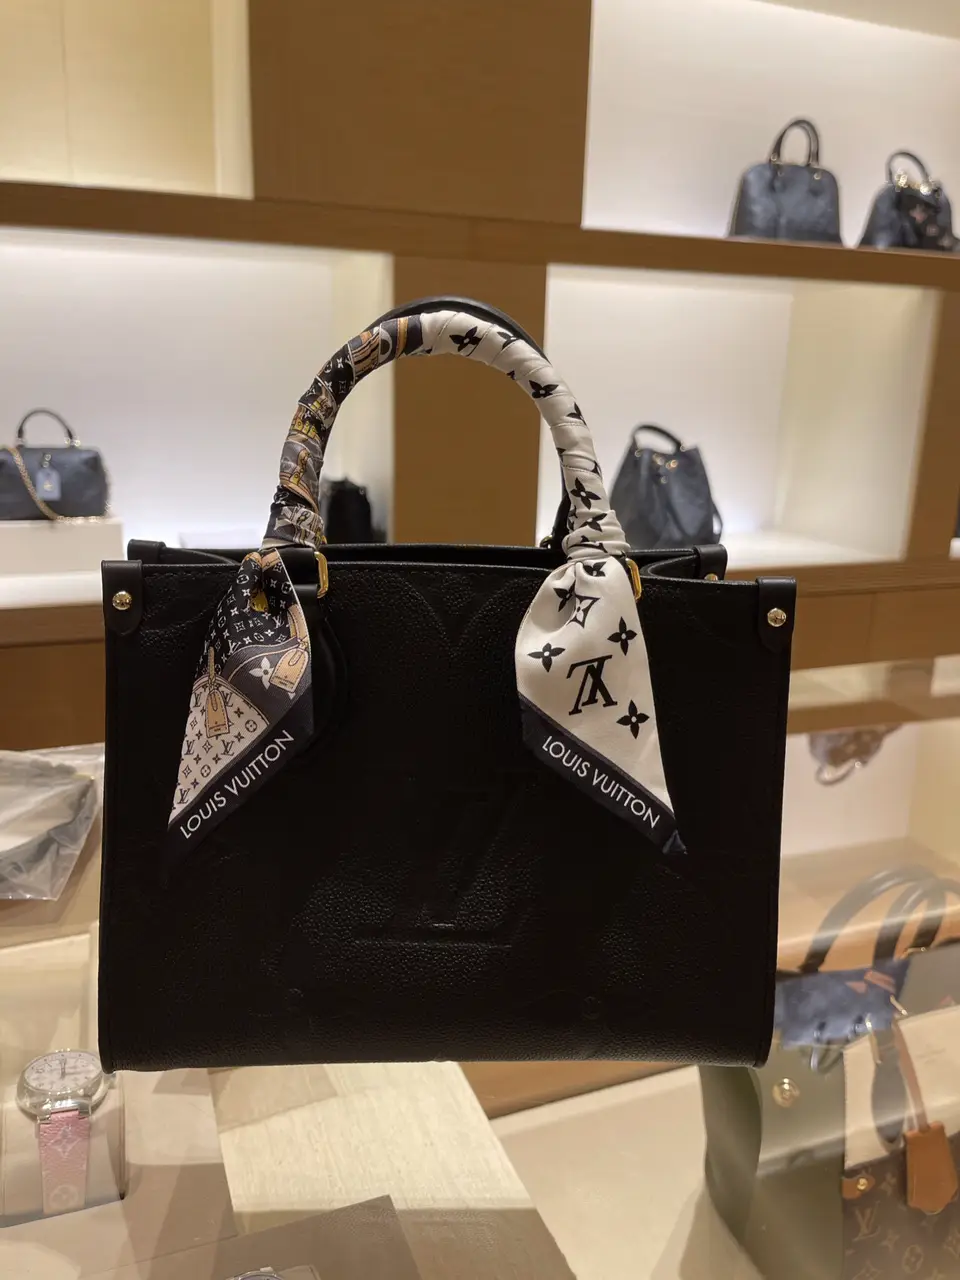 LV bag🛍, Gallery posted by Edwards summer